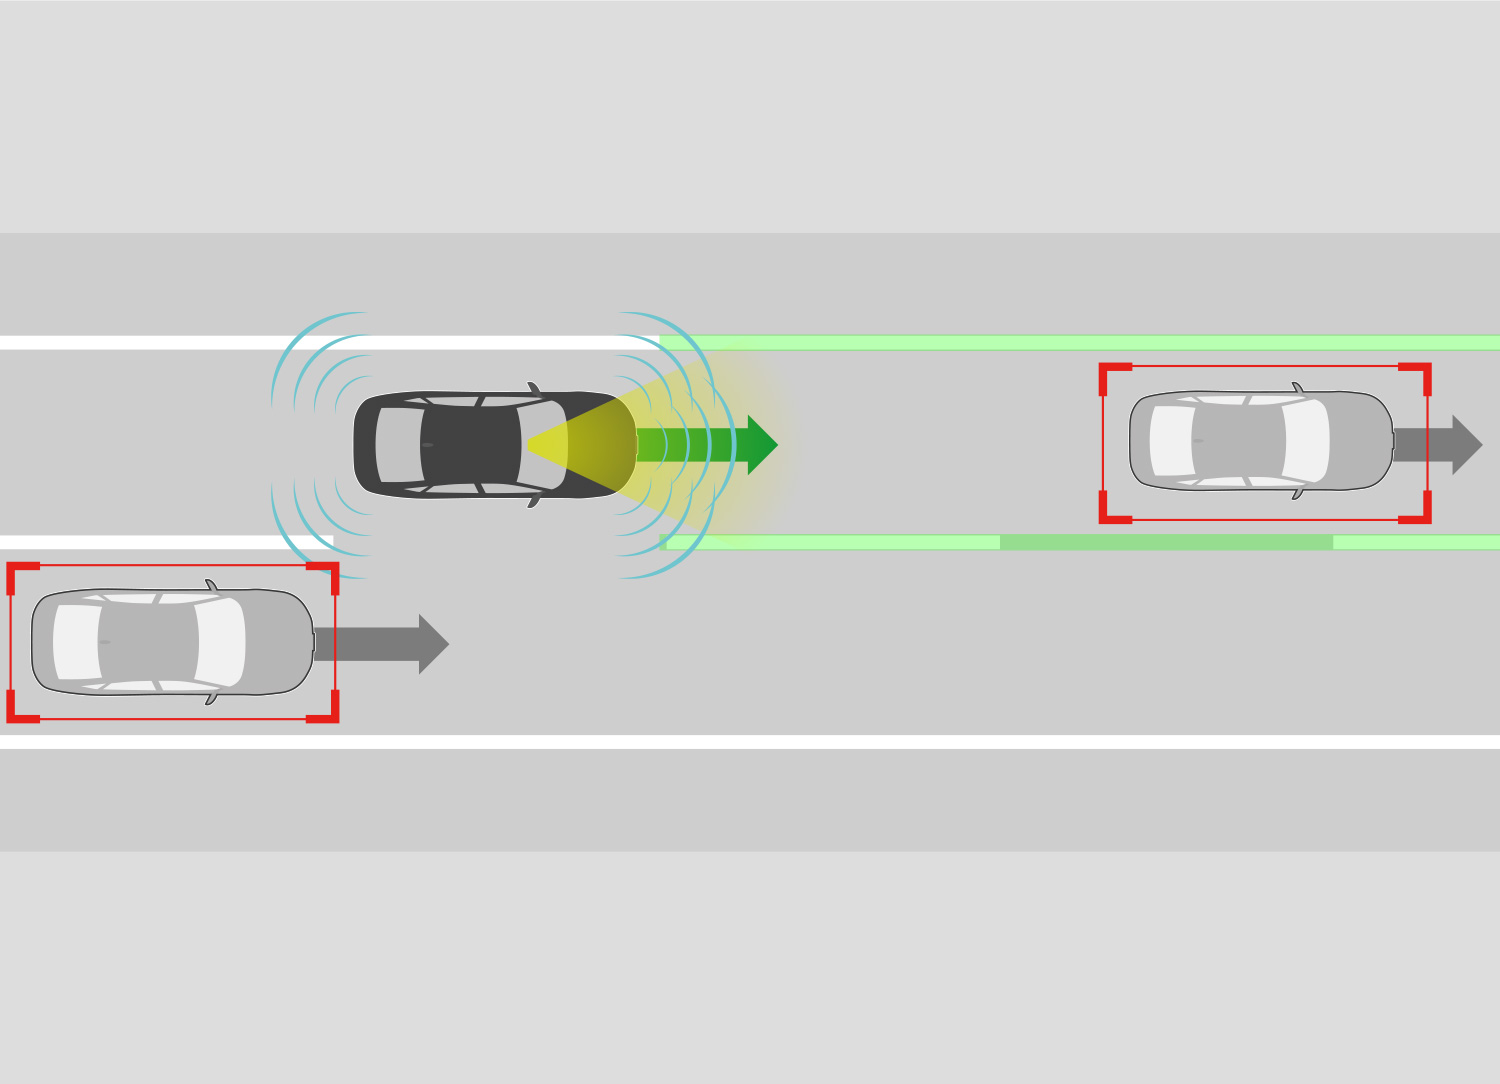 While driving on an expressway with Adaptive Cruise Control (ACC) with Low-Speed Follow and the Lane Keeping Assist System (LKAS) activated, the system uses high-definition maps to obtains information on the road ahead while also detecting other vehicles and road conditions in the vehicle’s surroundings using a camera and radar.